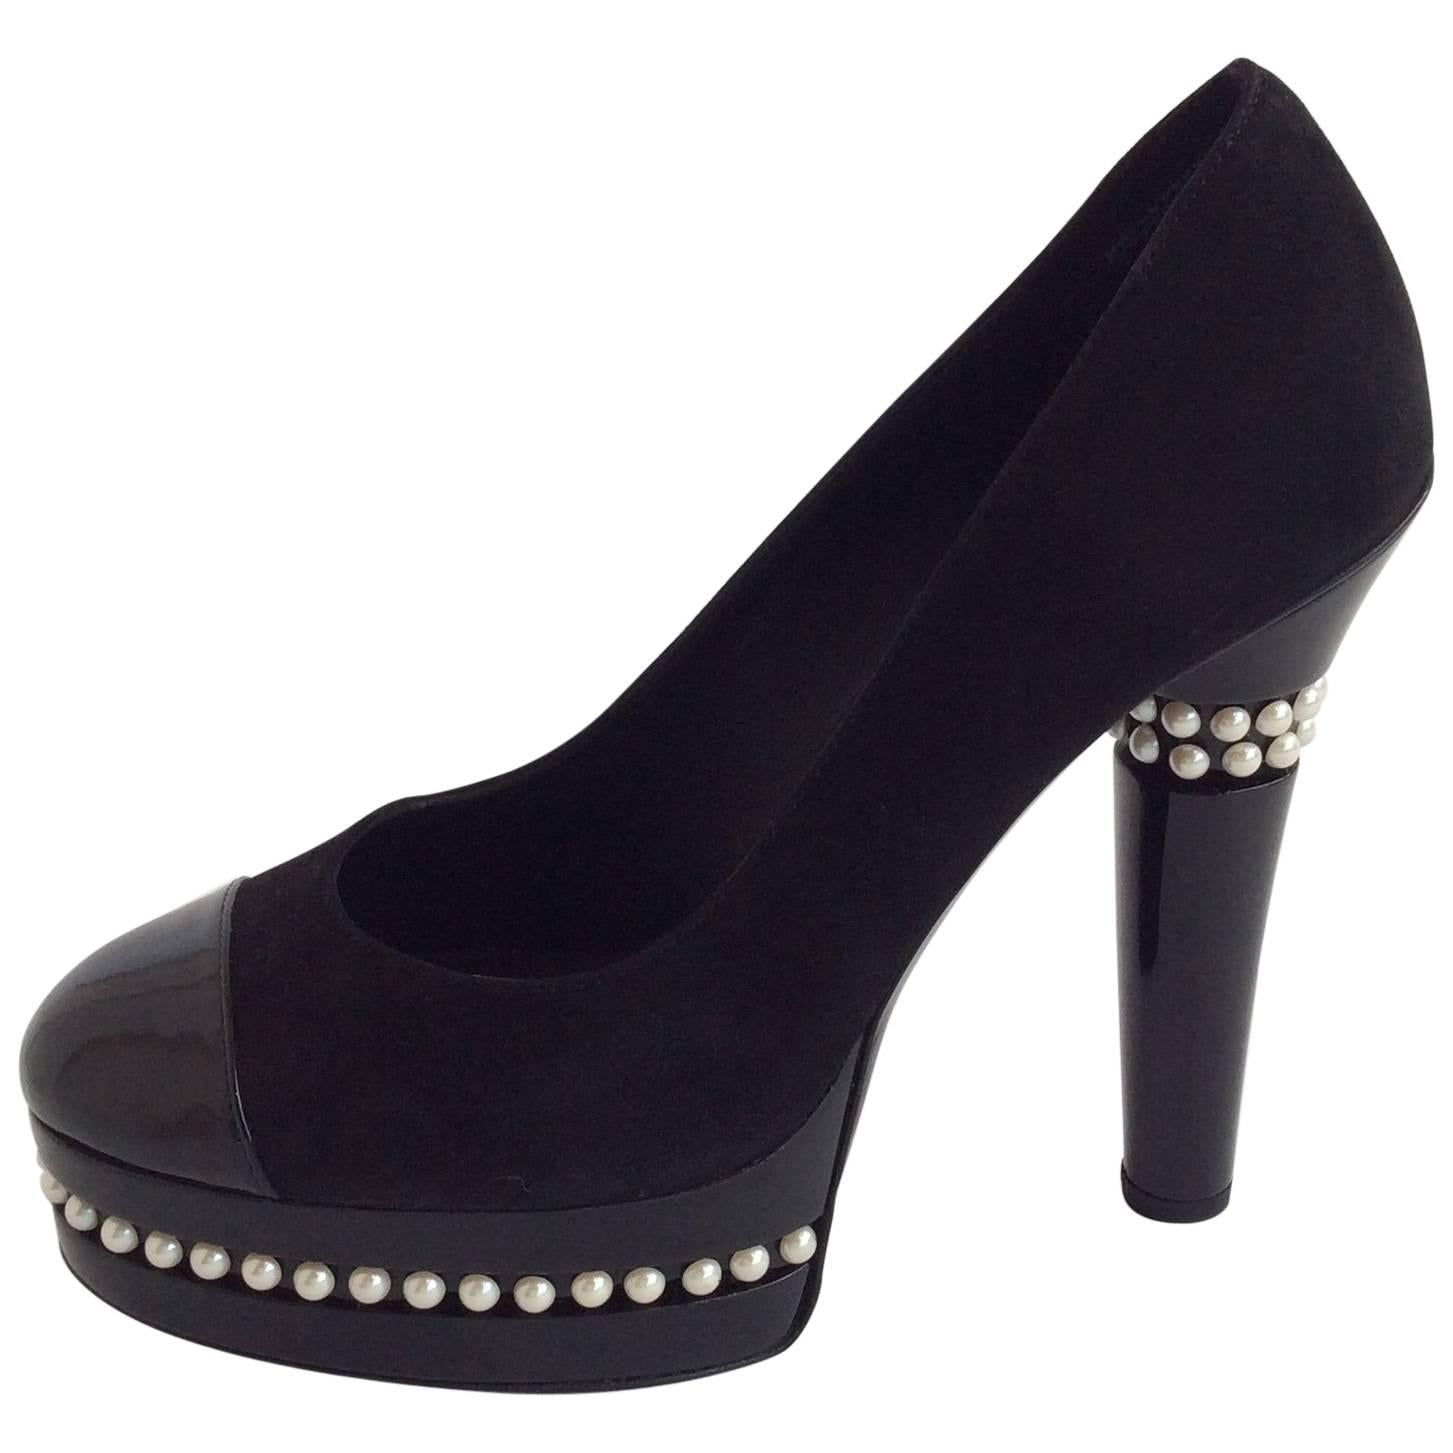 Chanel Black Suede And Patent Leather Platform Pumps With Pearl Detail Sz38